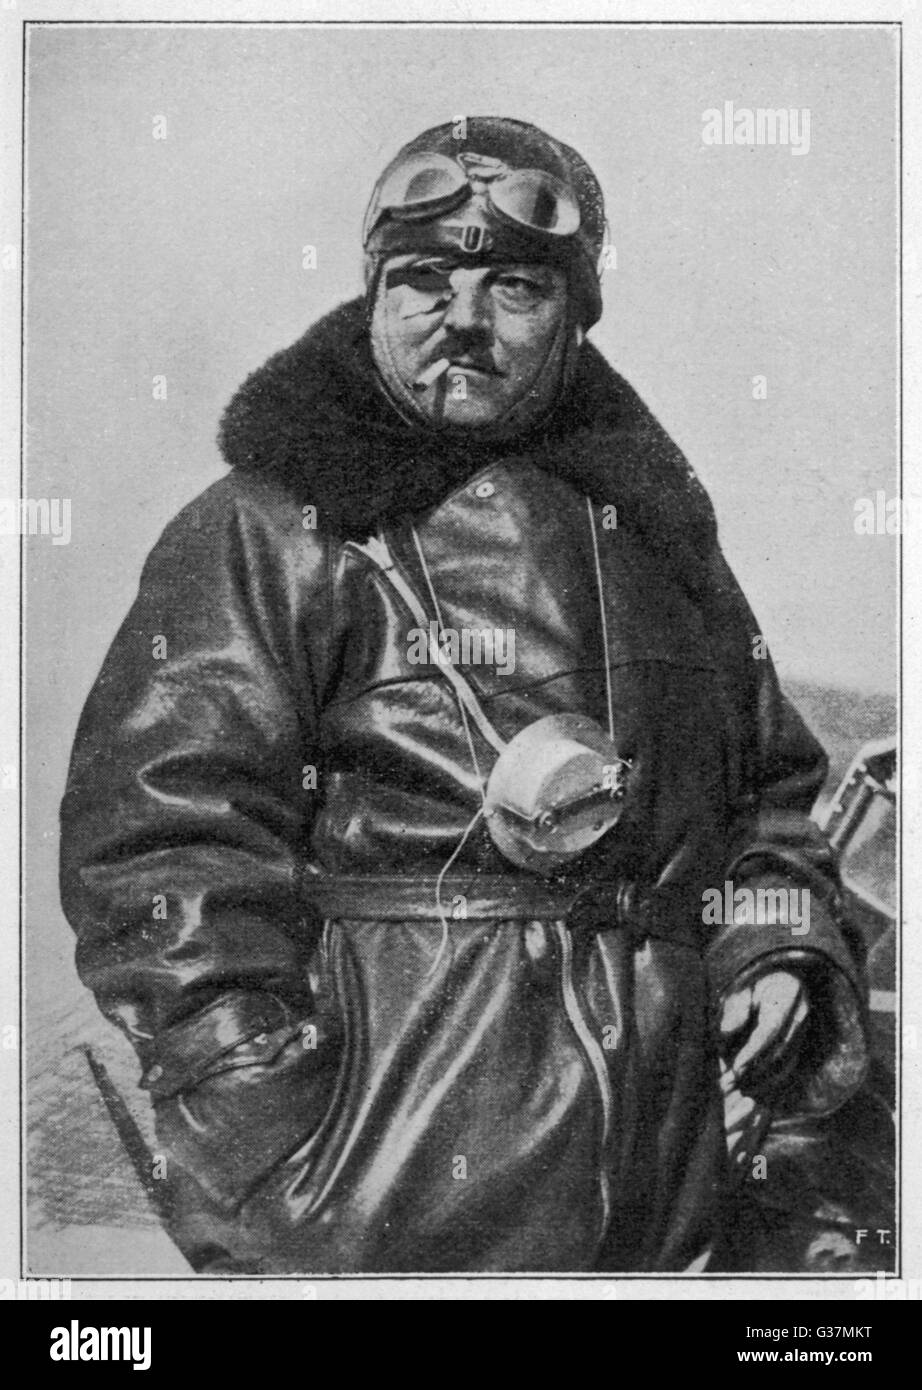 Francois Coli (1881-1927) - French pilot and navigator - lost in 1927 with Charles Nungesser during their doomed attempt to fly across the Atlantic Ocean.     Date: 1927 Stock Photo